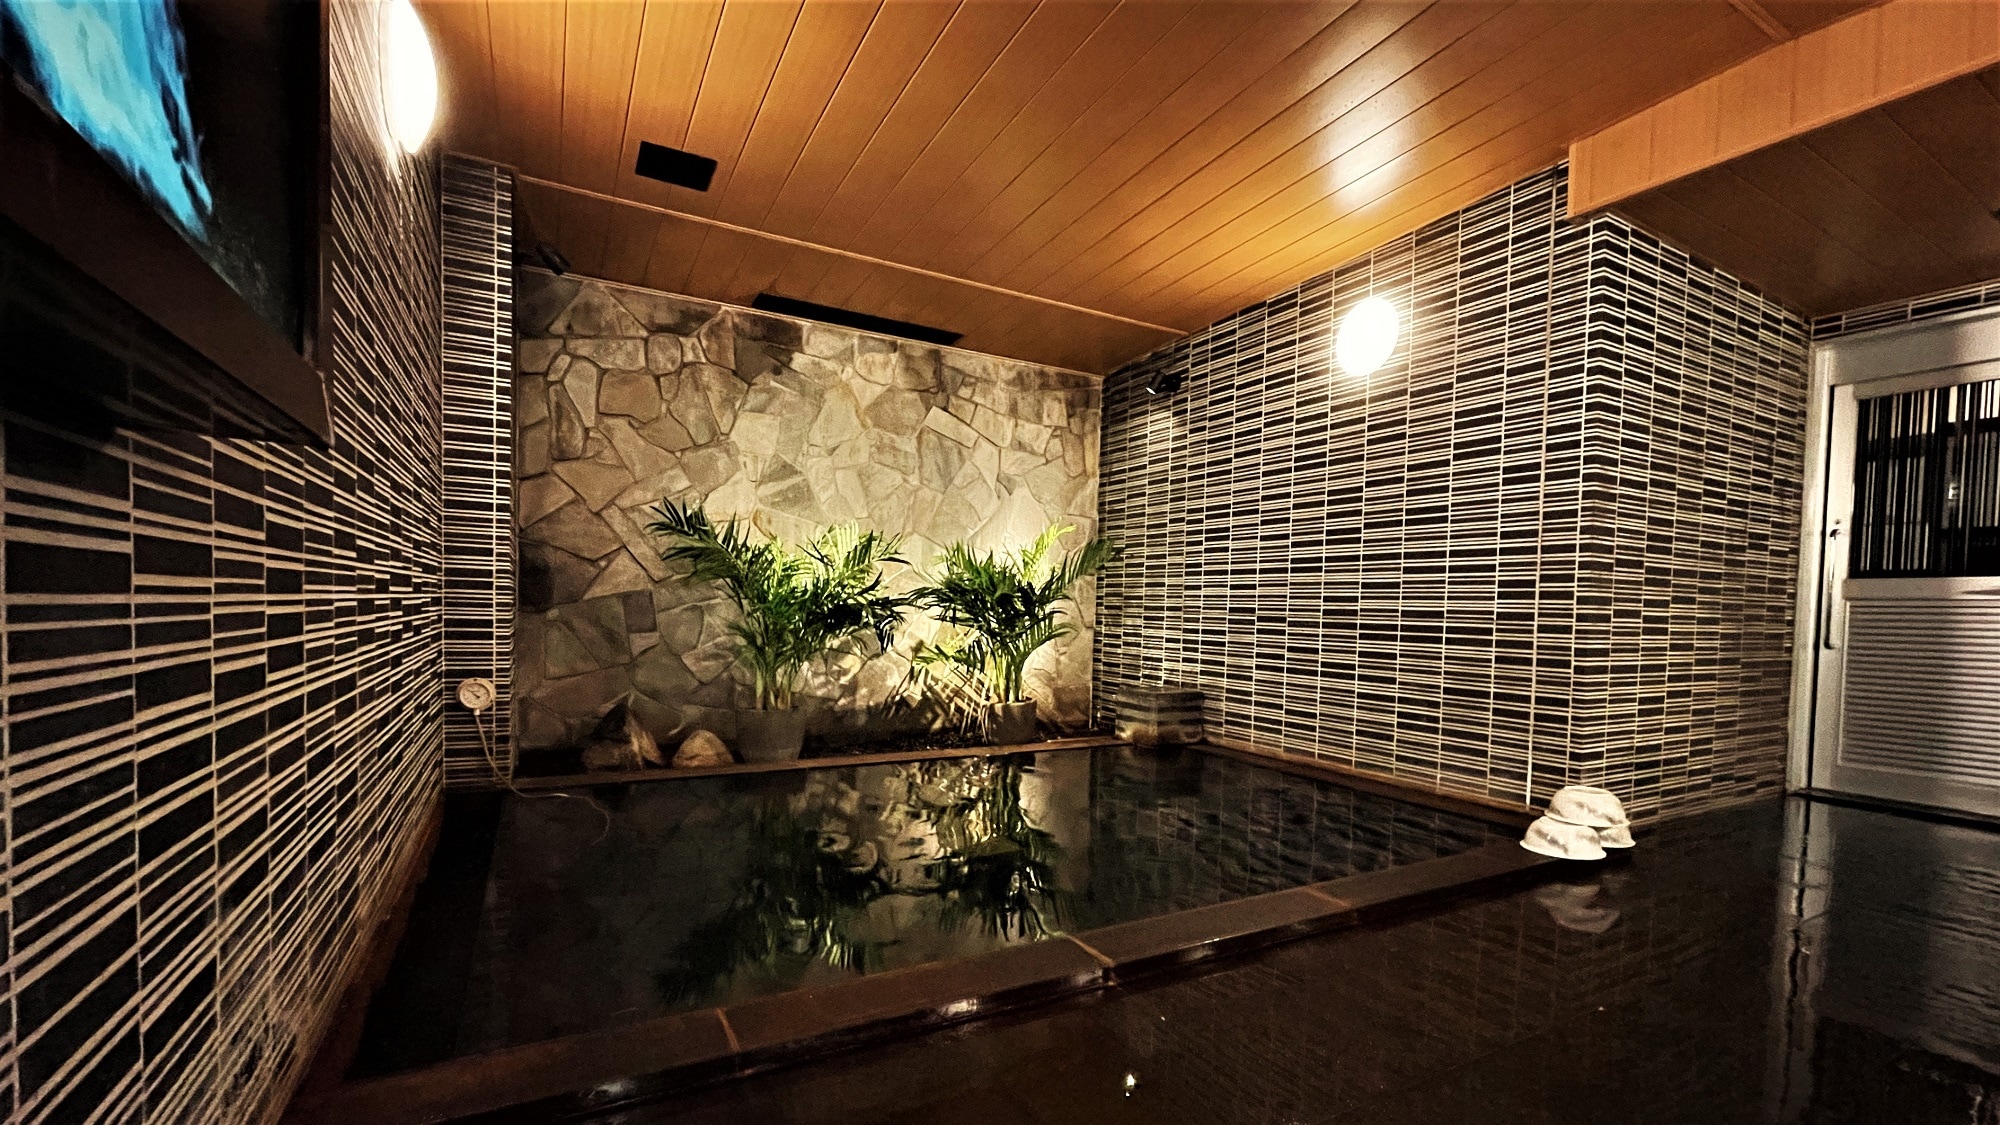 Men's public bath ☆ Open from 15:00 to 2:00 midnight from 5:00 am to 10:00 am